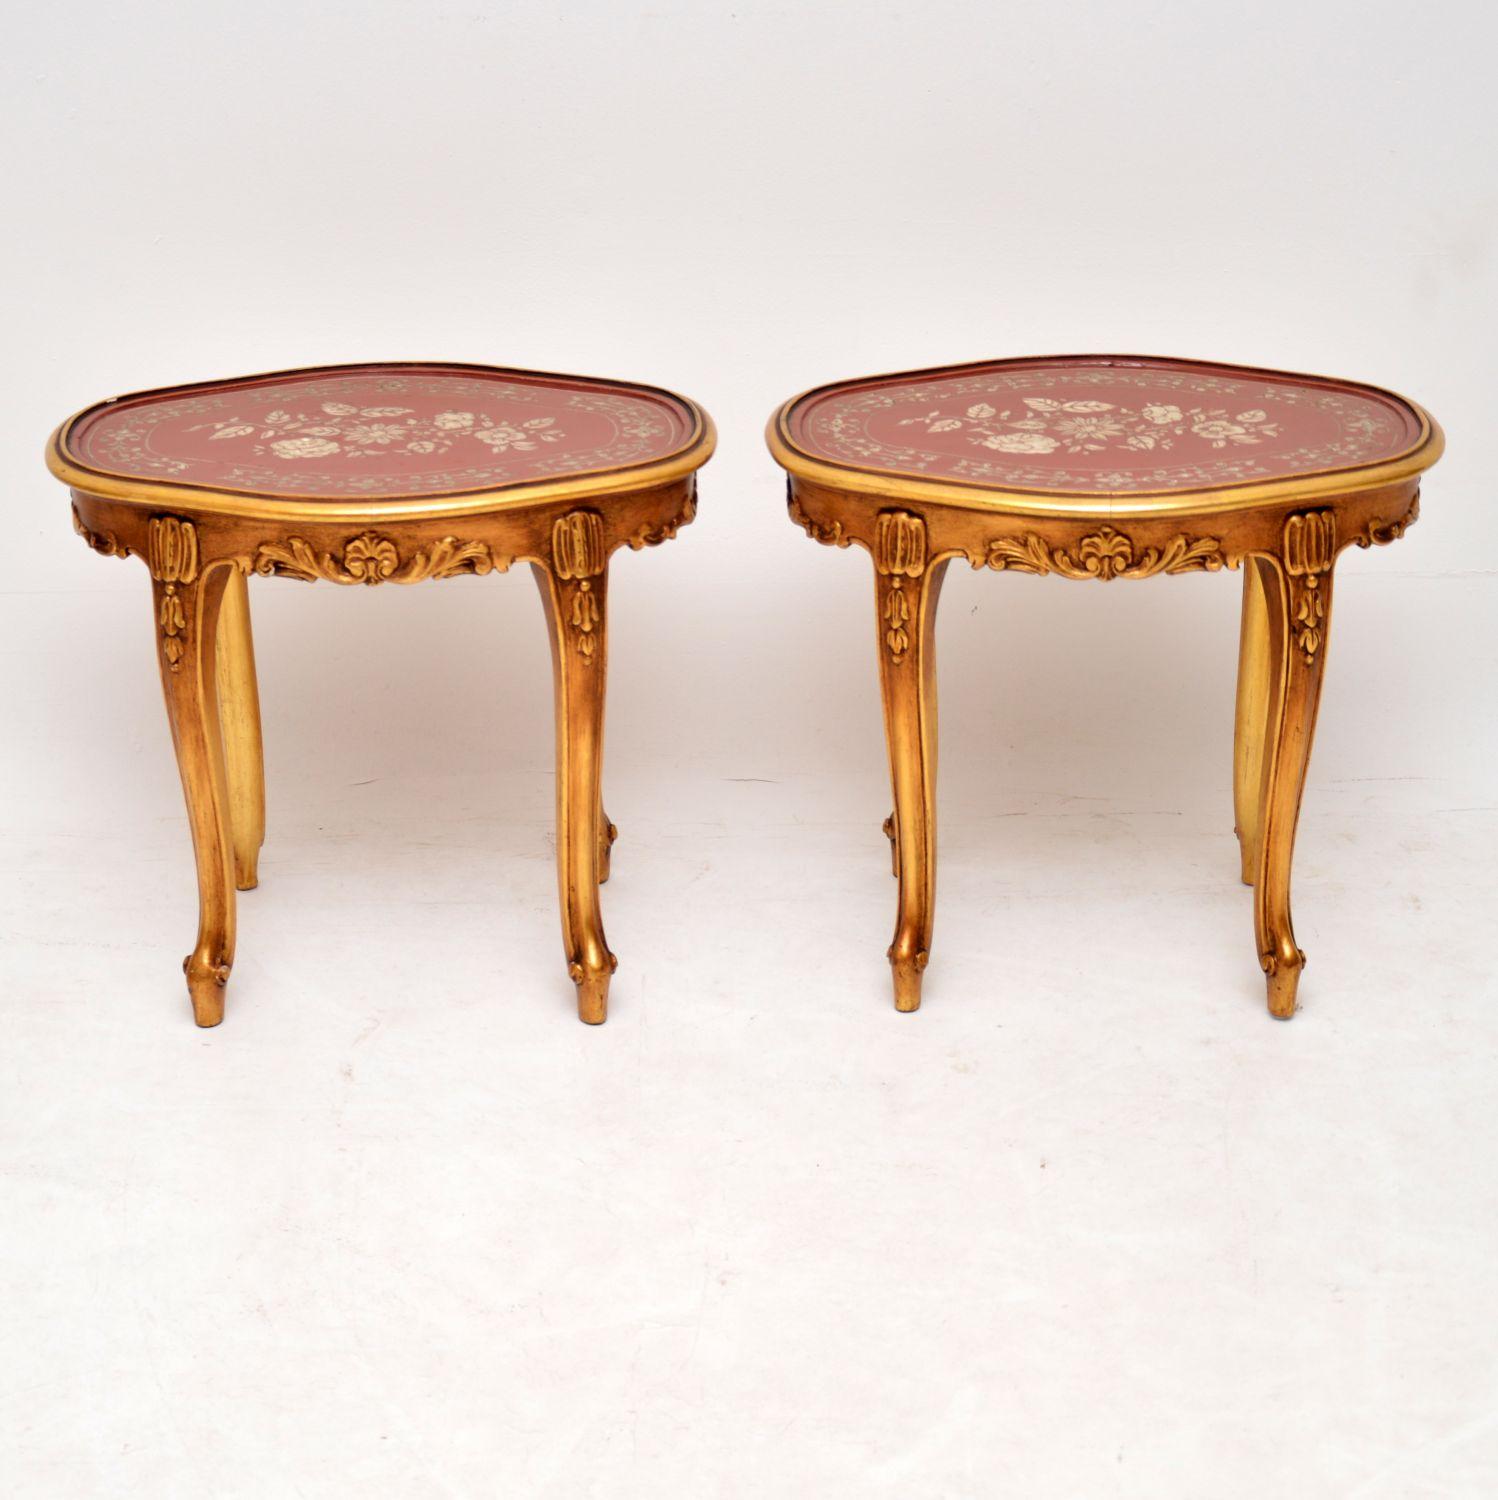 This pair of antique French style giltwood and lacquered side tables do have a matching coffee table to go with them. However, I can’t predict if either item will sell individually. The tops have a red lacquered background with floral decoration.